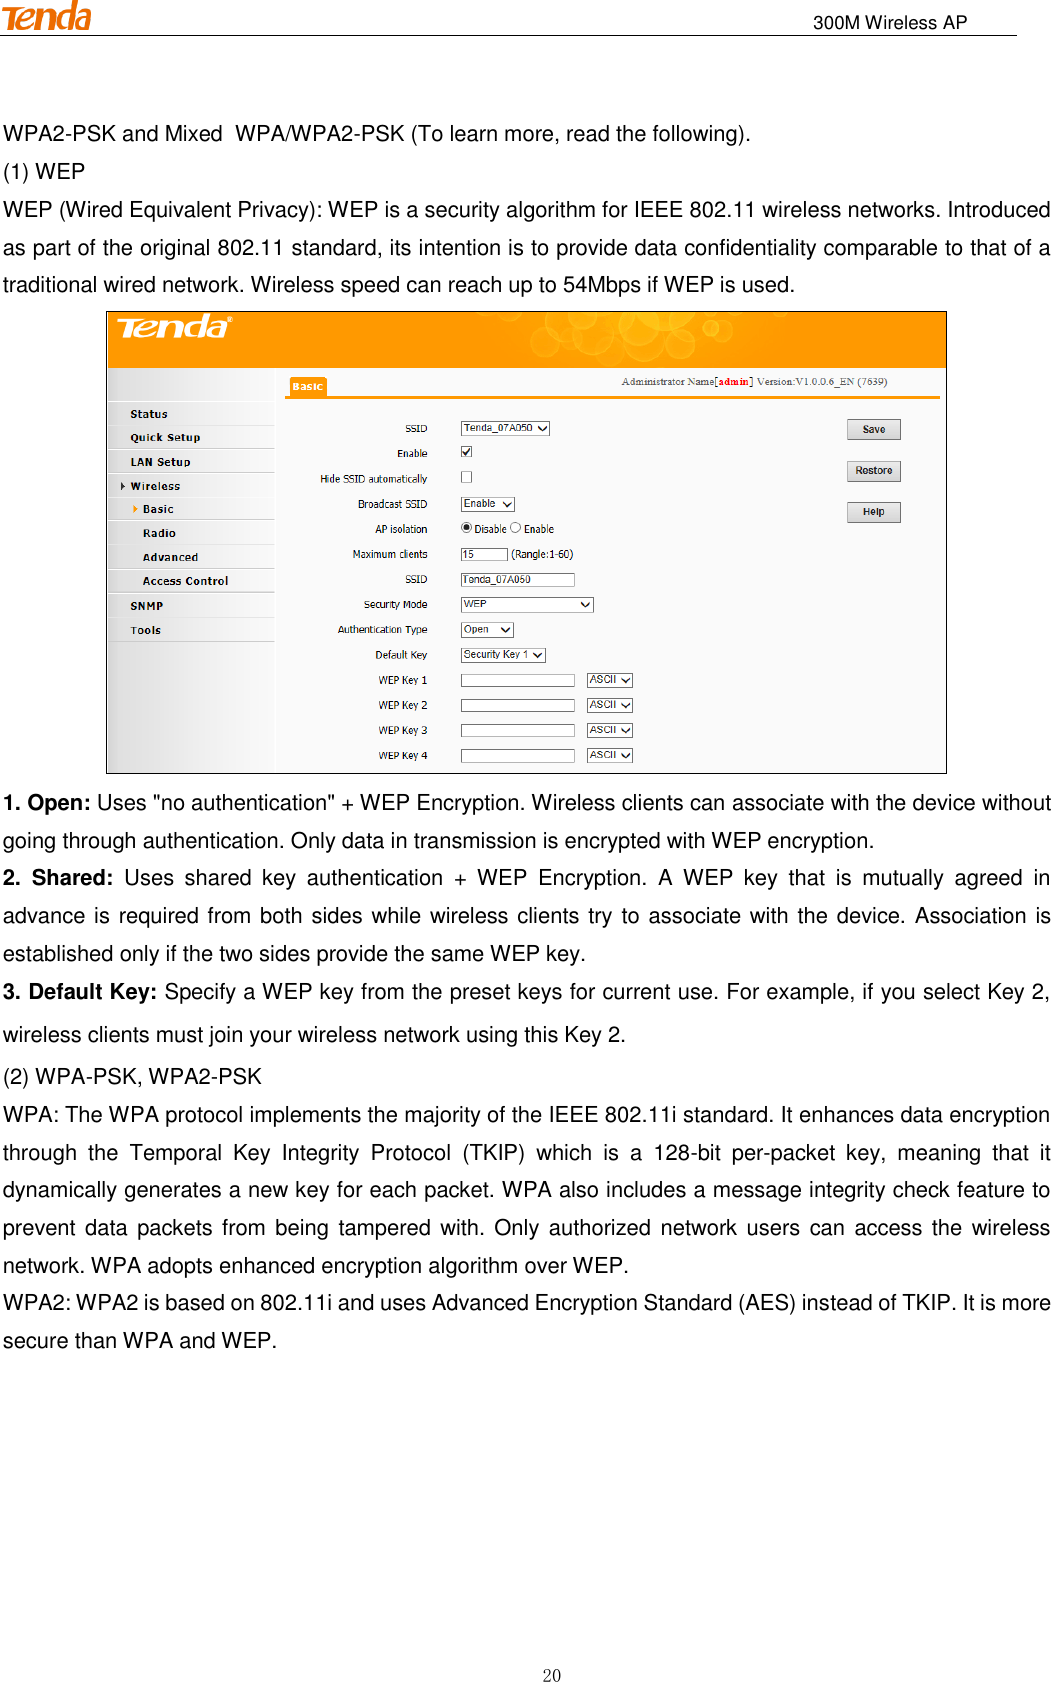                                                                              300M Wireless AP 20 WPA2-PSK and Mixed WPA/WPA2-PSK (To learn more, read the following). (1) WEP WEP (Wired Equivalent Privacy): WEP is a security algorithm for IEEE 802.11 wireless networks. Introduced as part of the original 802.11 standard, its intention is to provide data confidentiality comparable to that of a traditional wired network. Wireless speed can reach up to 54Mbps if WEP is used.  1. Open: Uses &quot;no authentication&quot; + WEP Encryption. Wireless clients can associate with the device without going through authentication. Only data in transmission is encrypted with WEP encryption. 2.  Shared:  Uses  shared  key  authentication  +  WEP  Encryption.  A  WEP  key  that  is  mutually  agreed  in advance is required from both sides while wireless clients try to associate with the device. Association is established only if the two sides provide the same WEP key. 3. Default Key: Specify a WEP key from the preset keys for current use. For example, if you select Key 2, wireless clients must join your wireless network using this Key 2. (2) WPA-PSK, WPA2-PSK WPA: The WPA protocol implements the majority of the IEEE 802.11i standard. It enhances data encryption through  the  Temporal  Key  Integrity  Protocol  (TKIP)  which  is  a  128-bit  per-packet  key,  meaning  that  it dynamically generates a new key for each packet. WPA also includes a message integrity check feature to prevent data  packets from being  tampered  with. Only authorized network users  can access the  wireless network. WPA adopts enhanced encryption algorithm over WEP. WPA2: WPA2 is based on 802.11i and uses Advanced Encryption Standard (AES) instead of TKIP. It is more secure than WPA and WEP. 